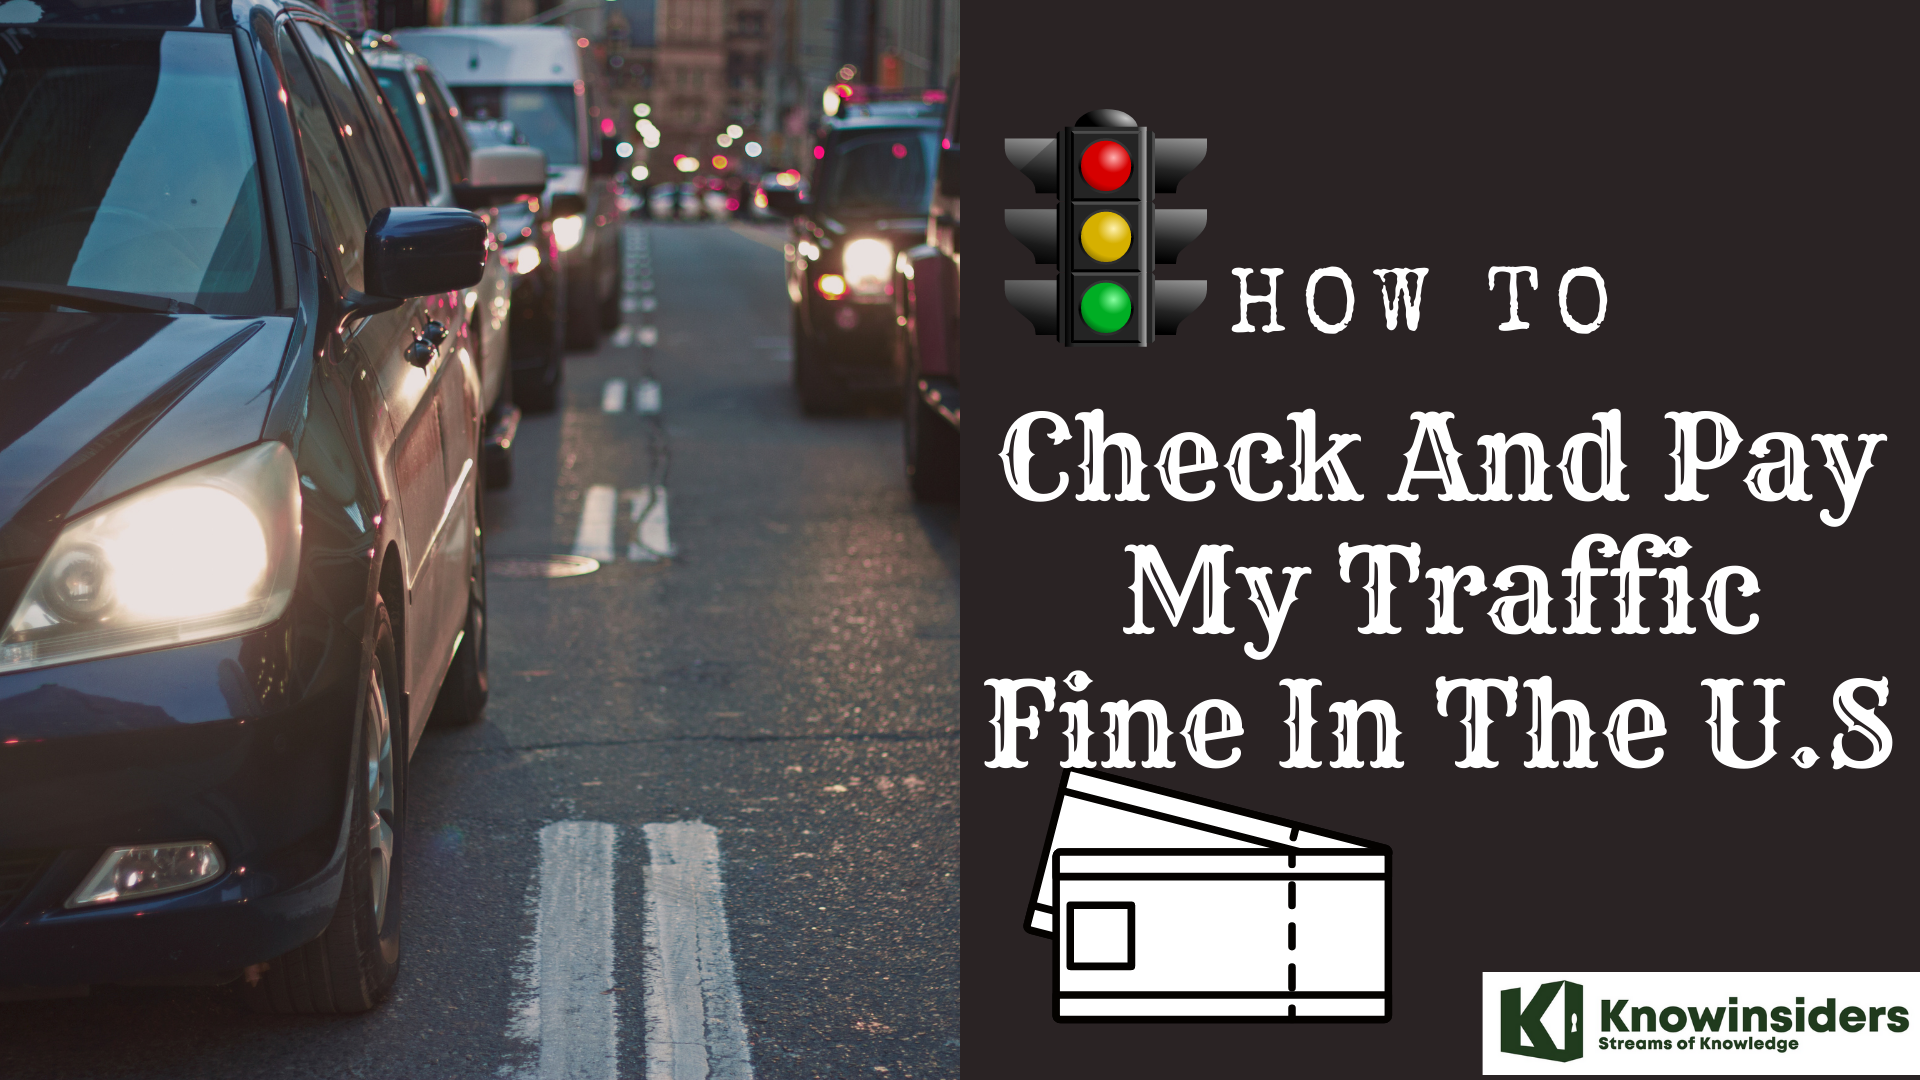 How To Check and Pay The Traffic Fine Online In The U.S (Update)